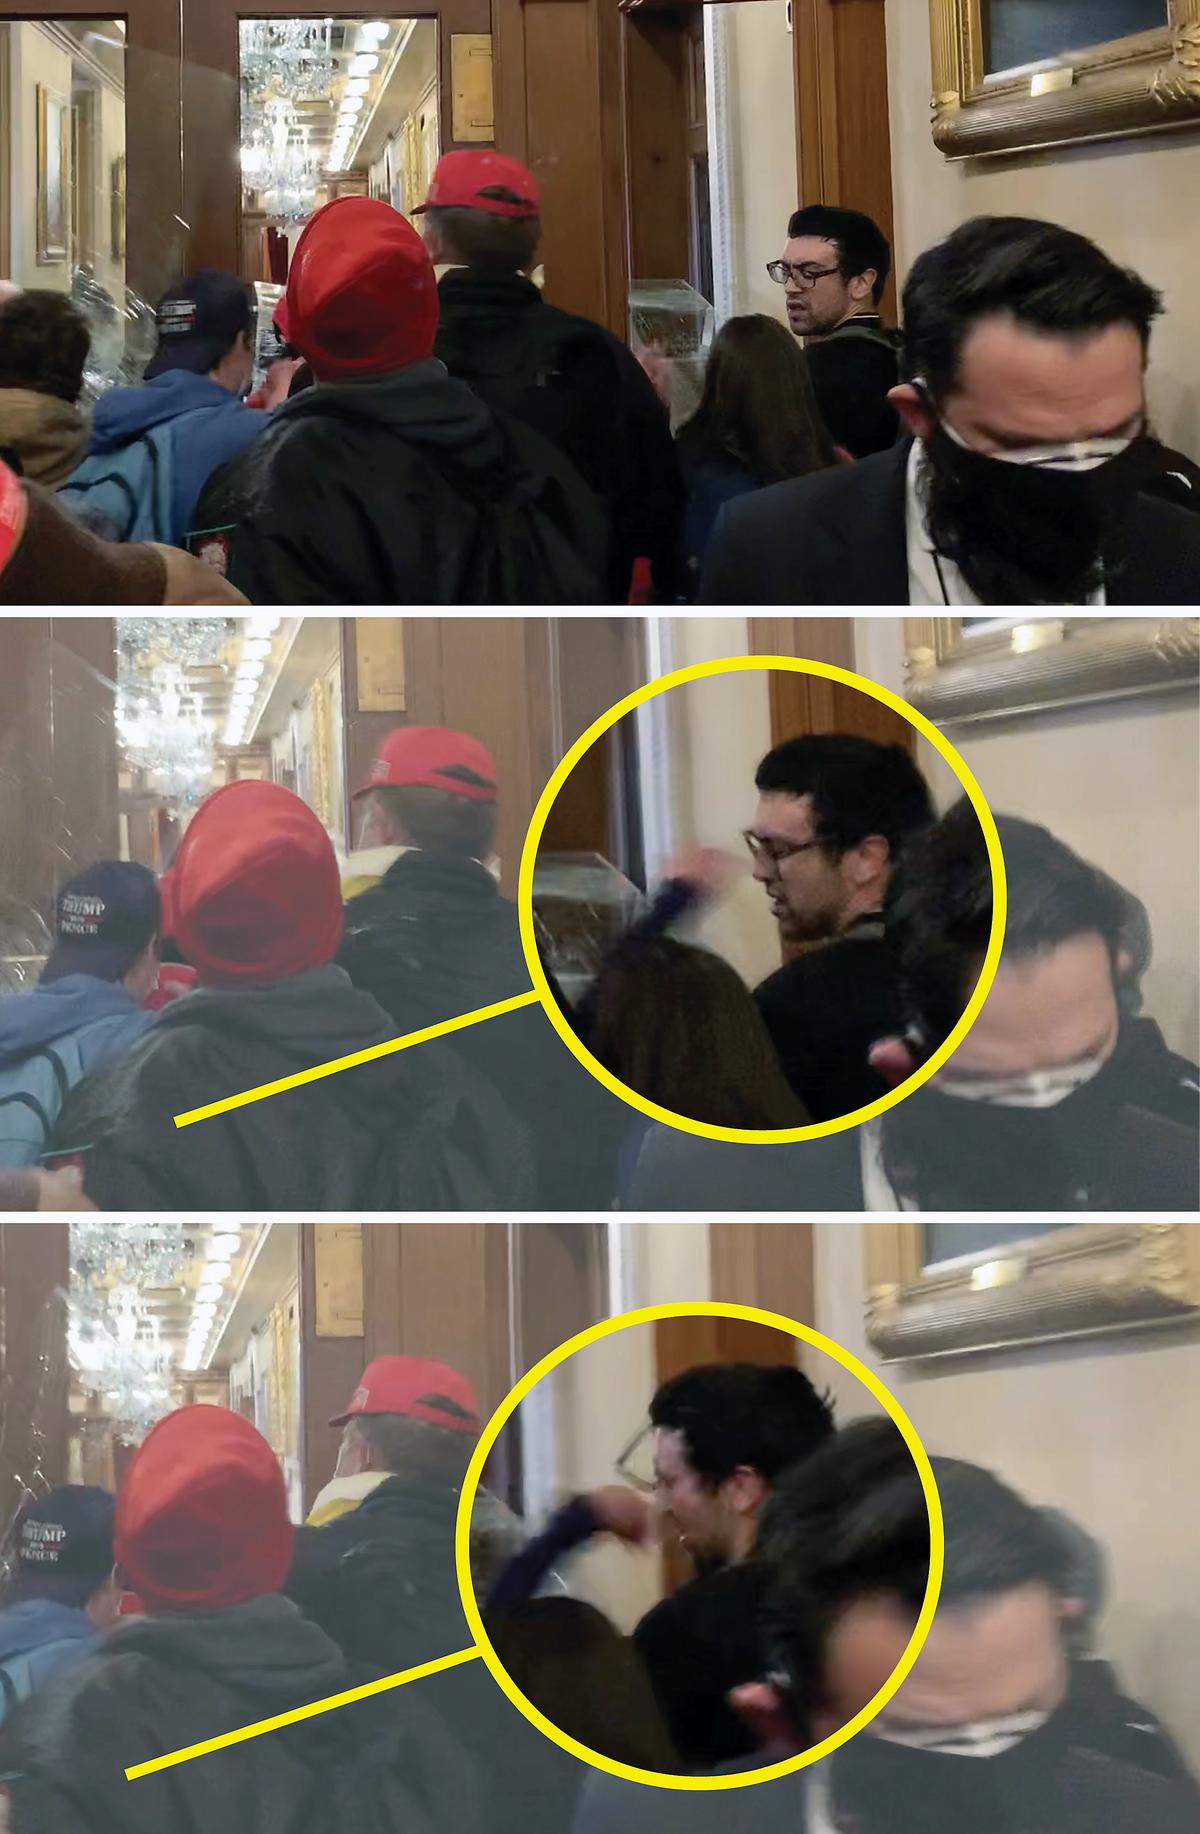 Video stills show Ashli Babbitt punch rioter Zachary Alam in the face after he broke a window leading into the Speaker's Lobby at the U.S. Capitol on Jan. 6, 2021. (Video Stills by Sam Montoya / Graphic by The Epoch Times)